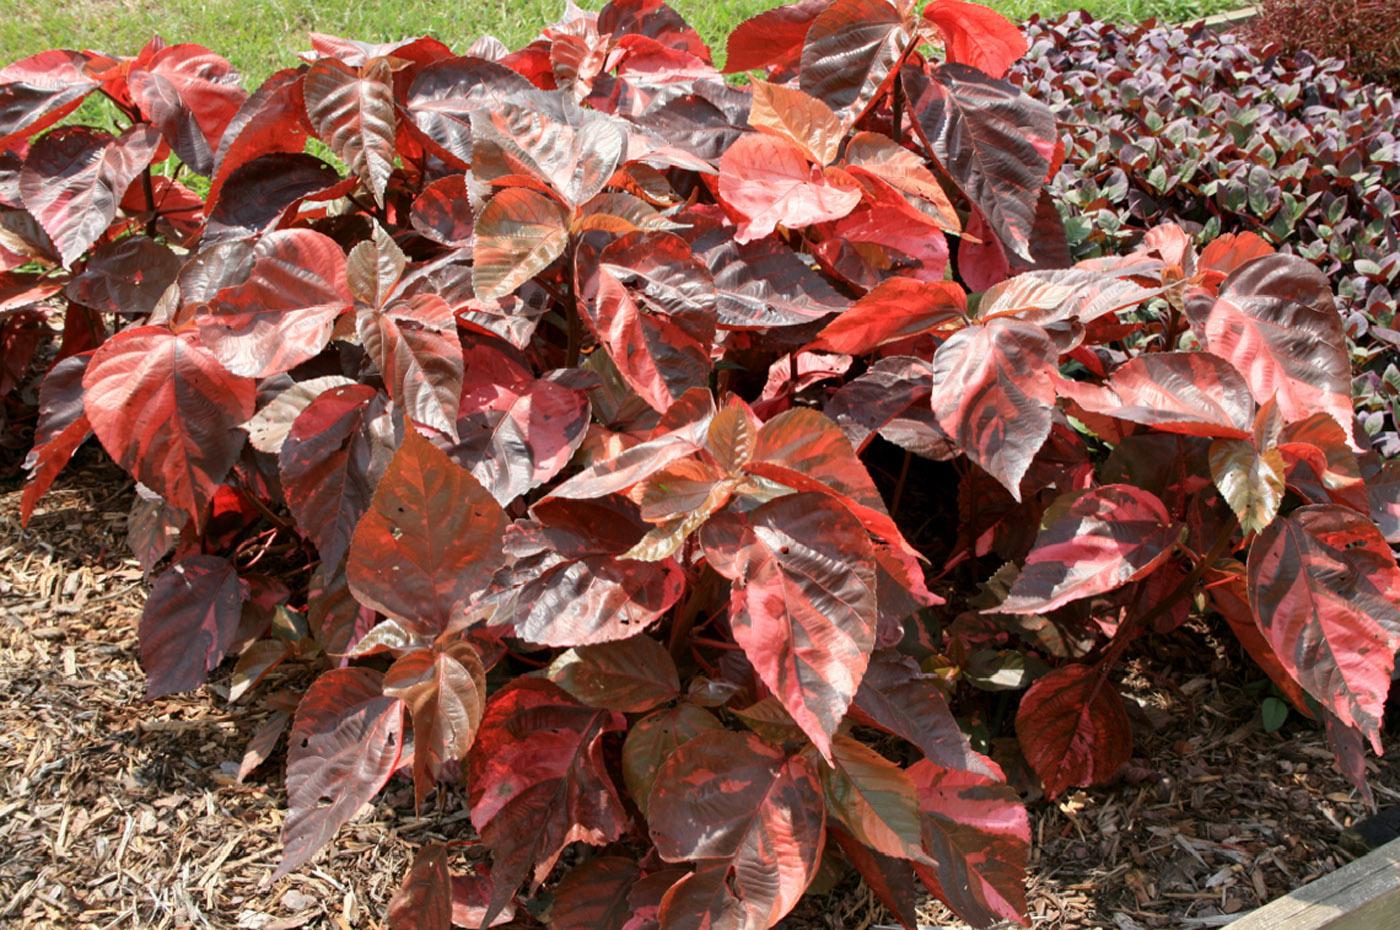 Acalypha Bronze Pink works well in the landscape or containers. The leaves are dark pink to reddish bronze. It gives a terrific show when planted in mass in the landscape and is a great thriller plant in containers. 